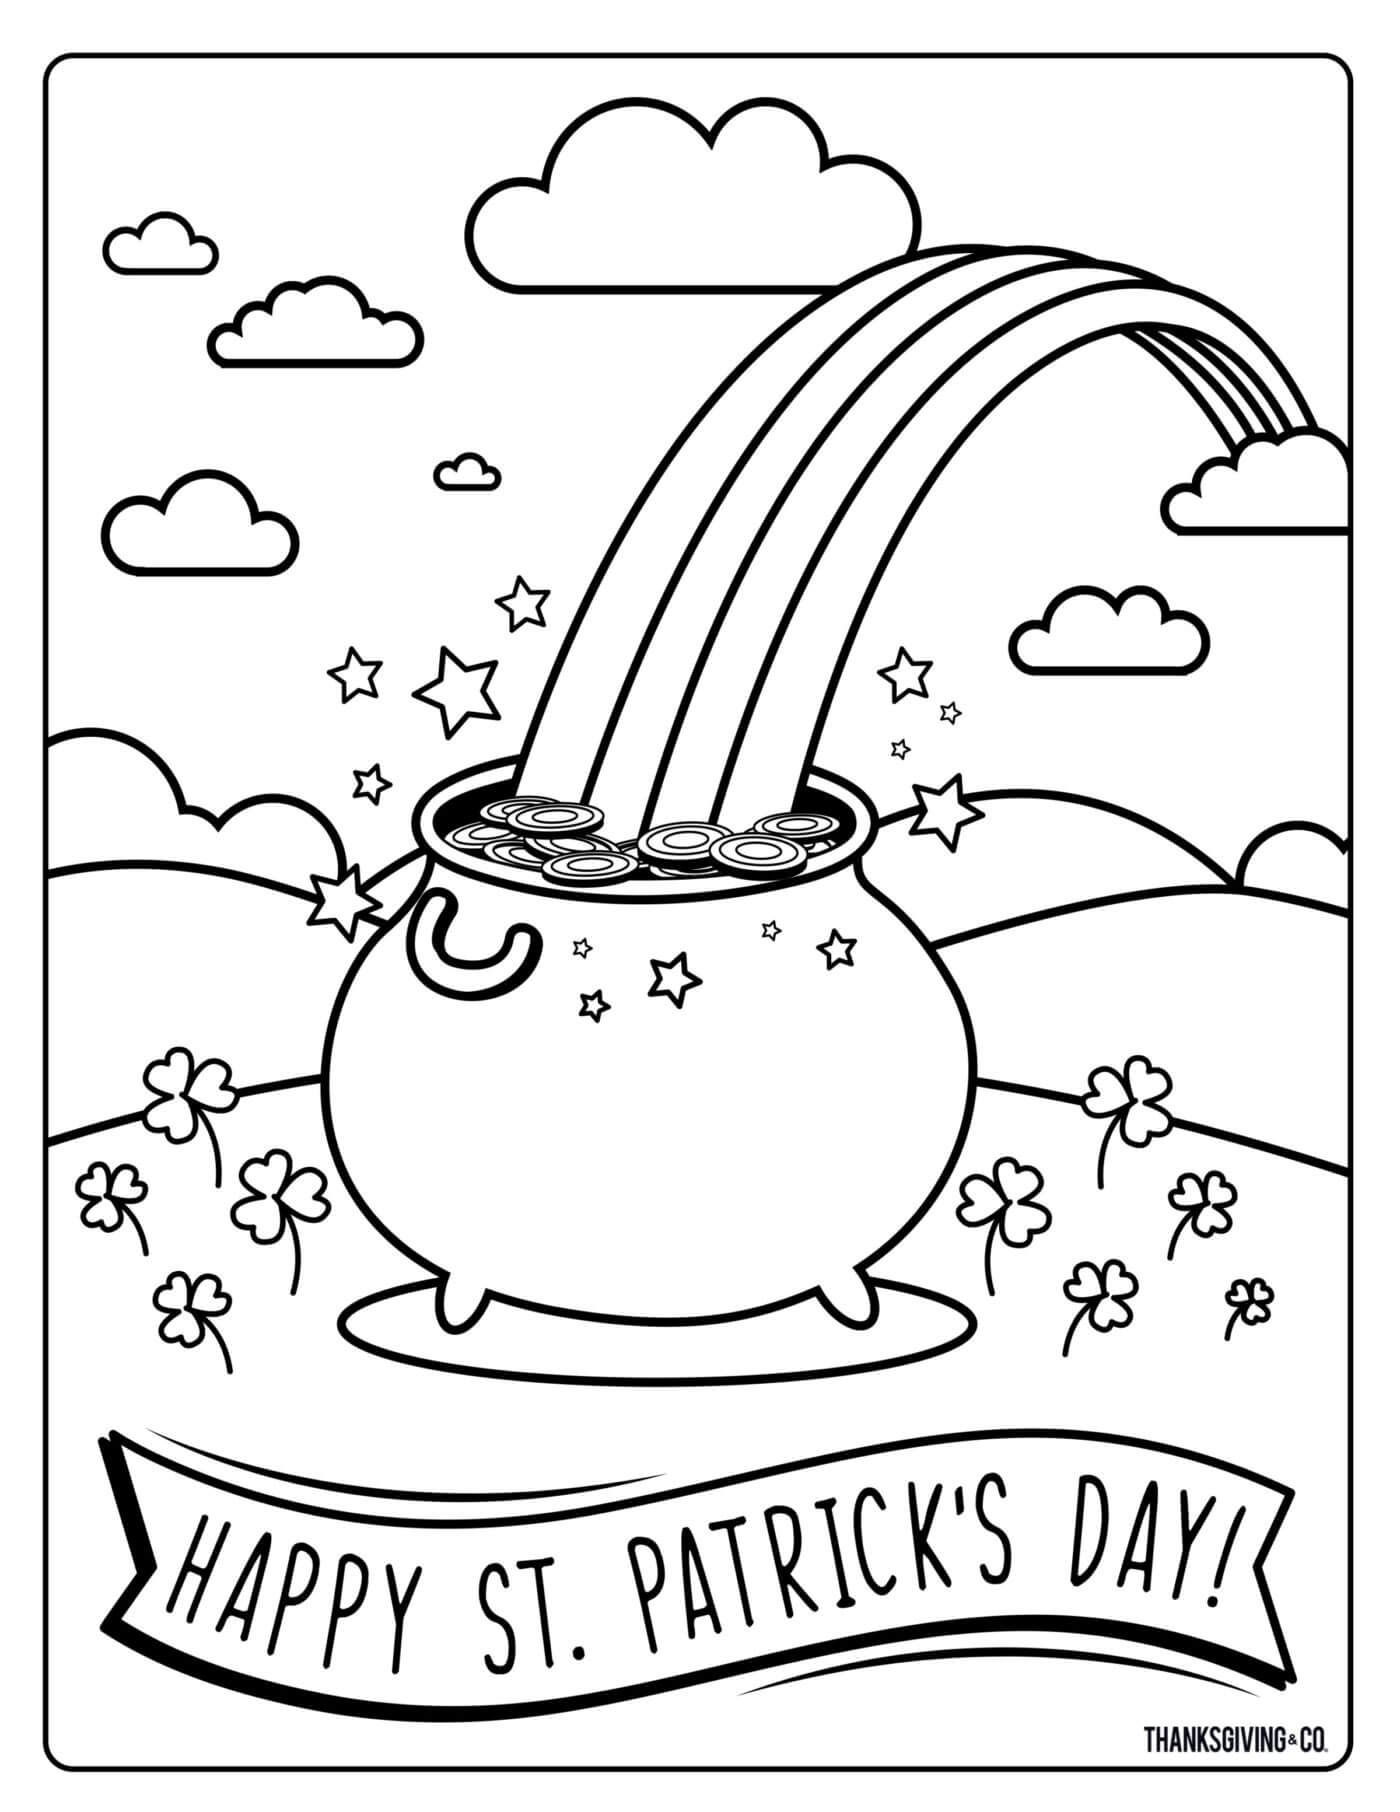 st patrick's day coloring pages | st patrick's day coloring pages dltk | disney st patrick's day coloring pages